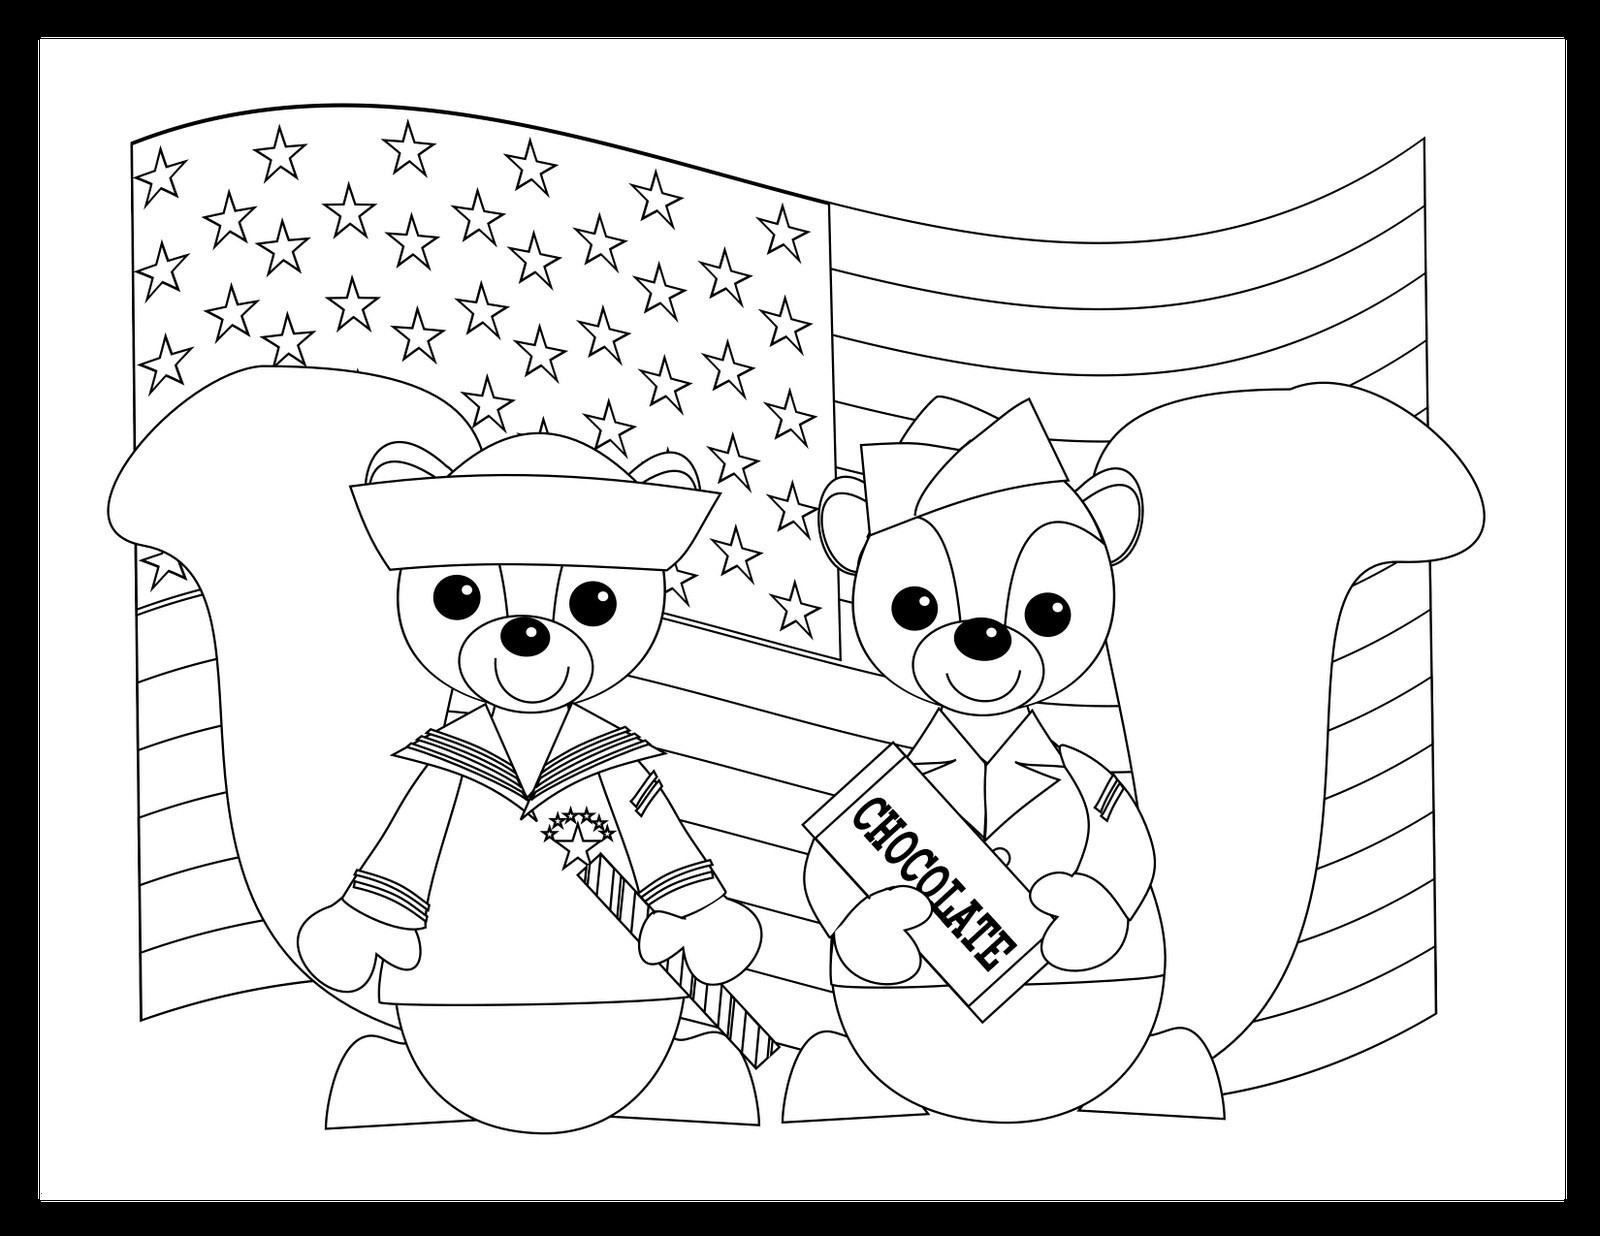 Coloring Pages : Extraordinary Happyrans Dayloring Pages Photo - Veterans Day Free Printable Cards